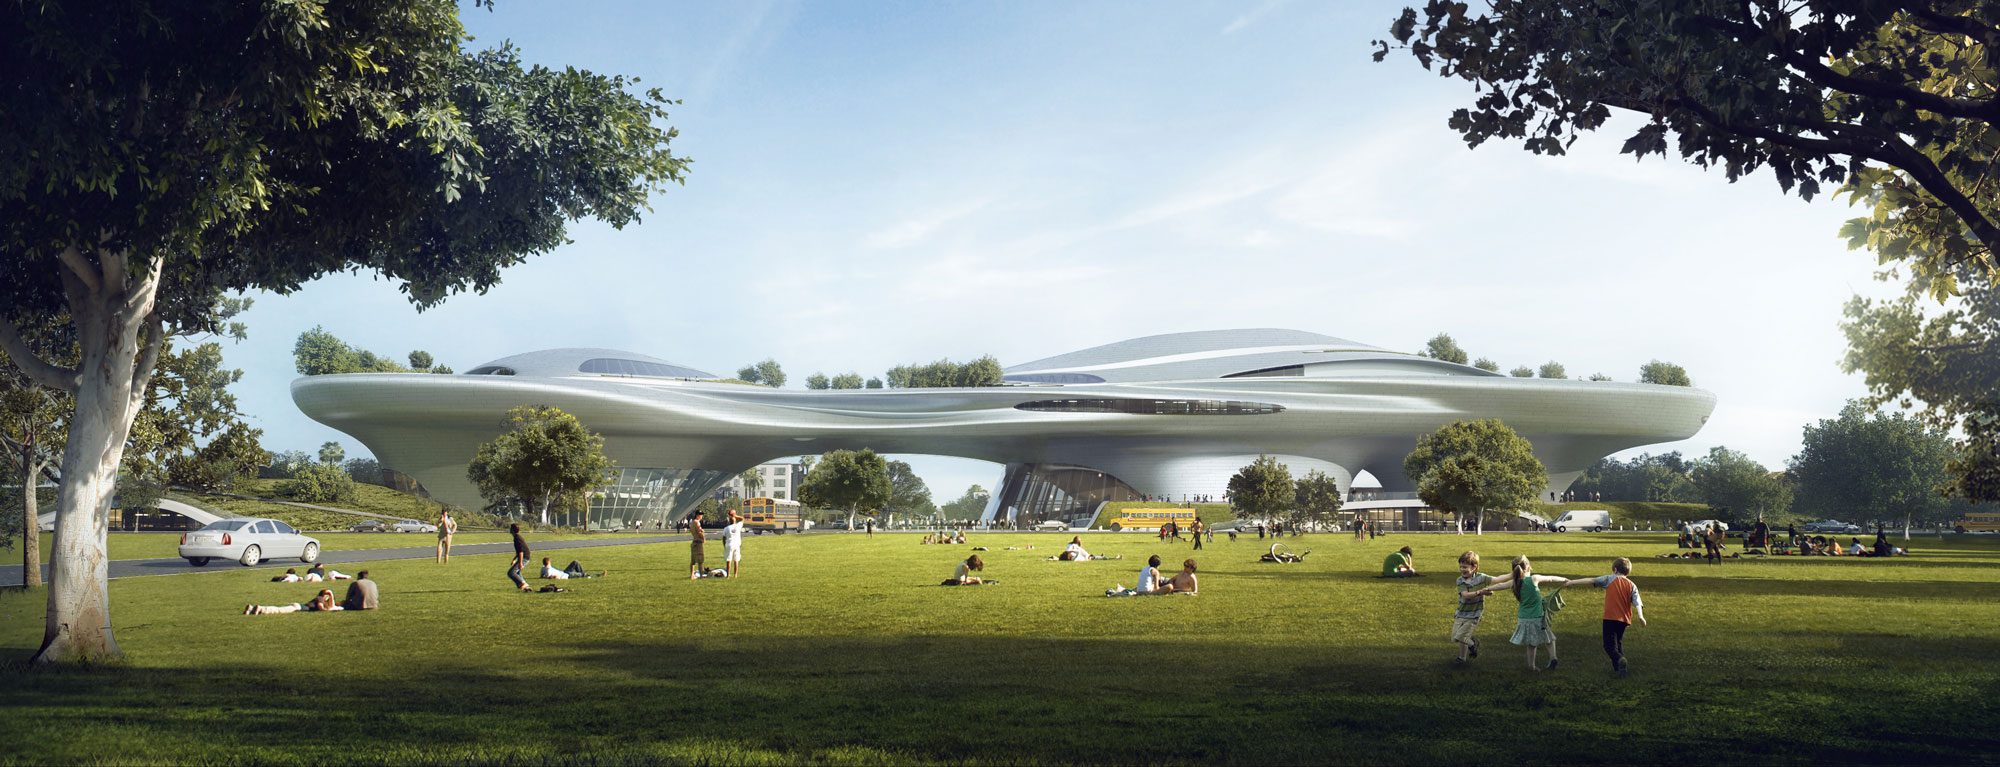 Rendering of the Lucas Museum of Narrative Arts new museum to be built in Los Angeles